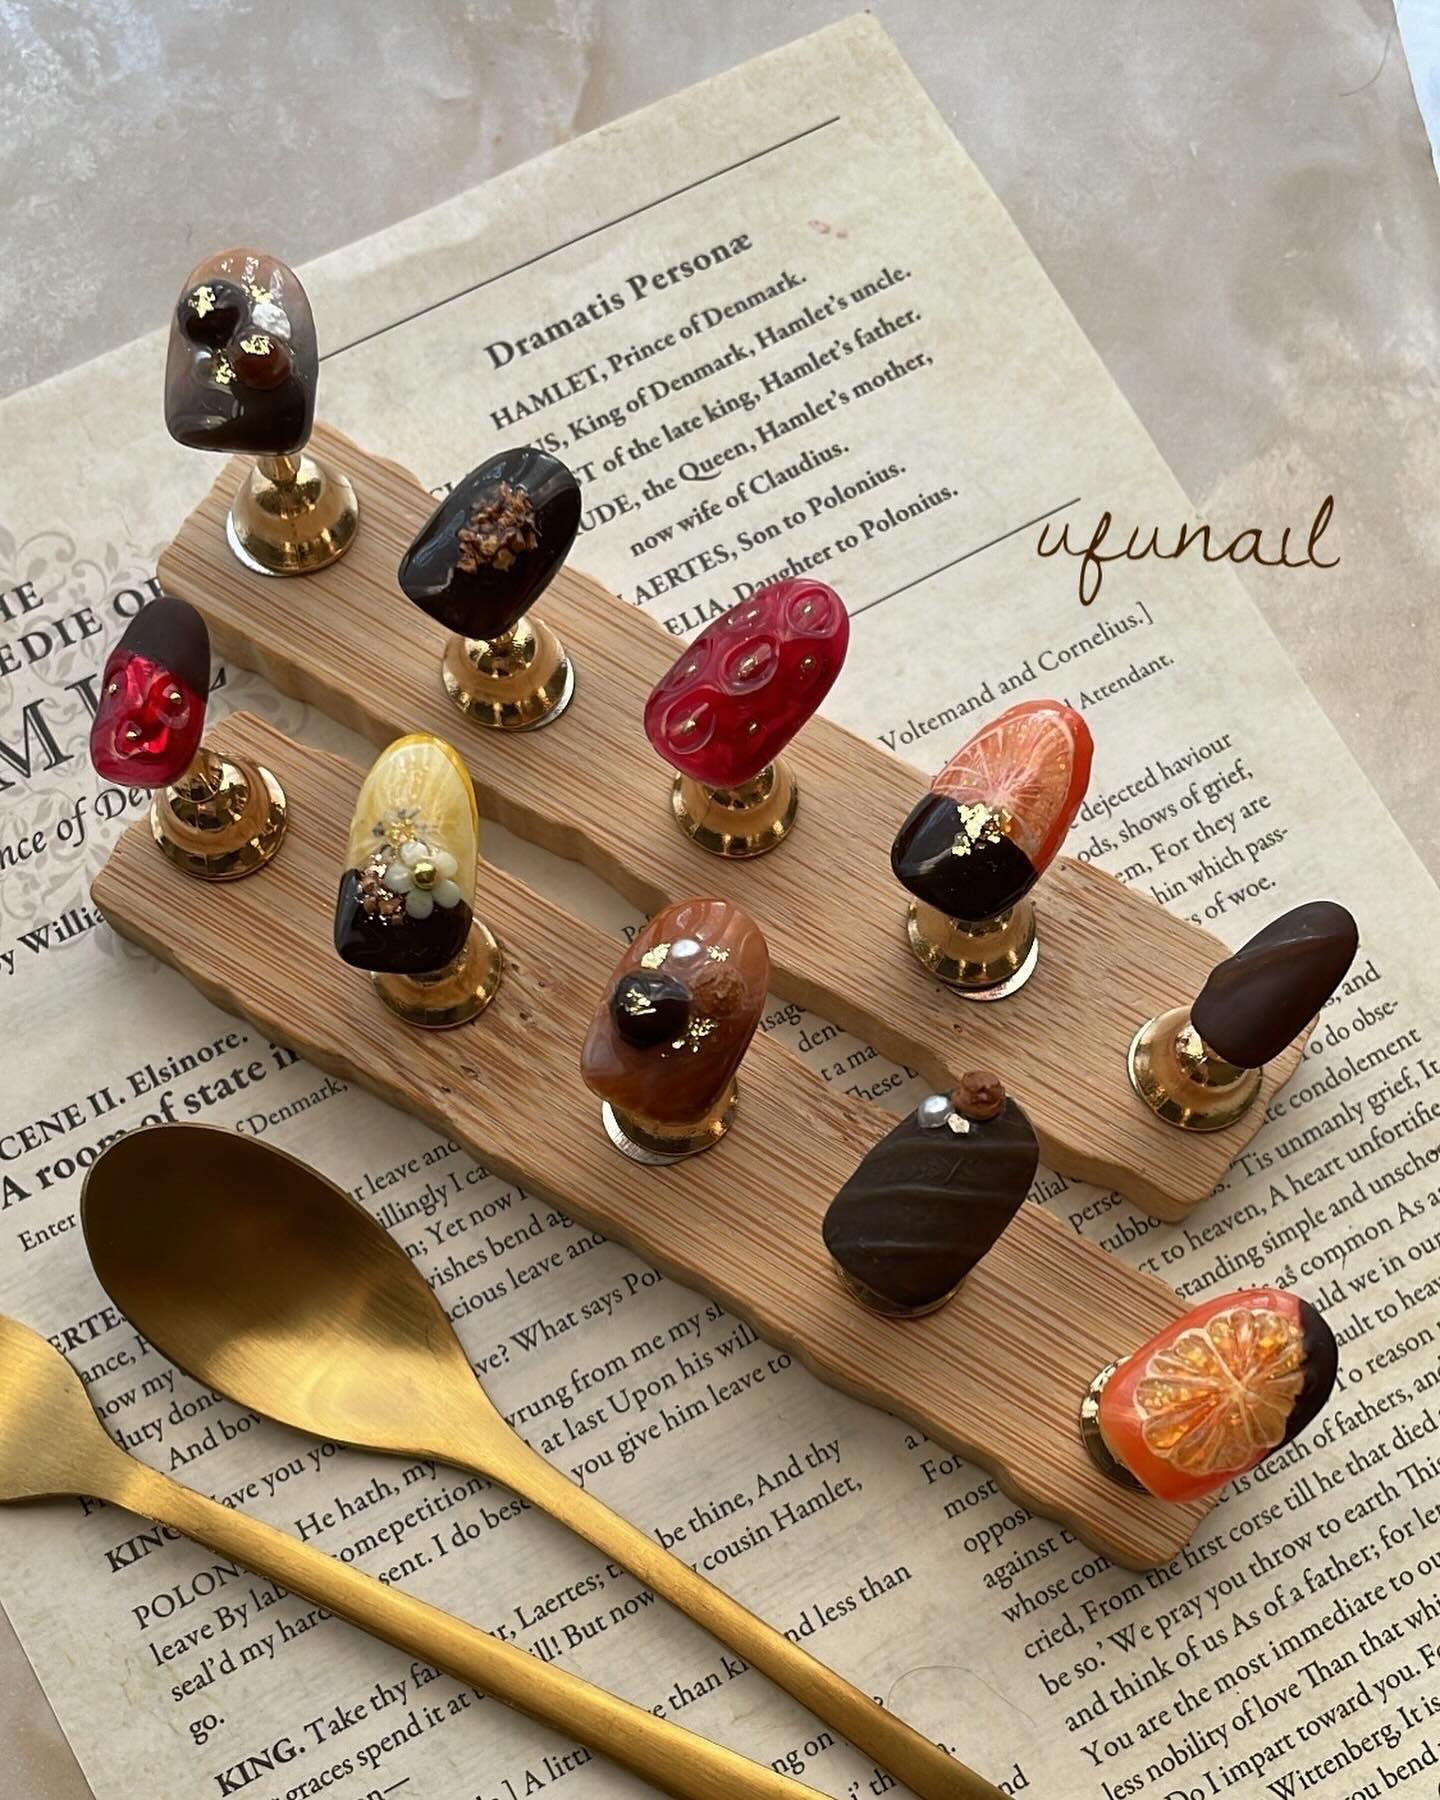 Autumn Elegance with Chocolate and Caramel Nail Art